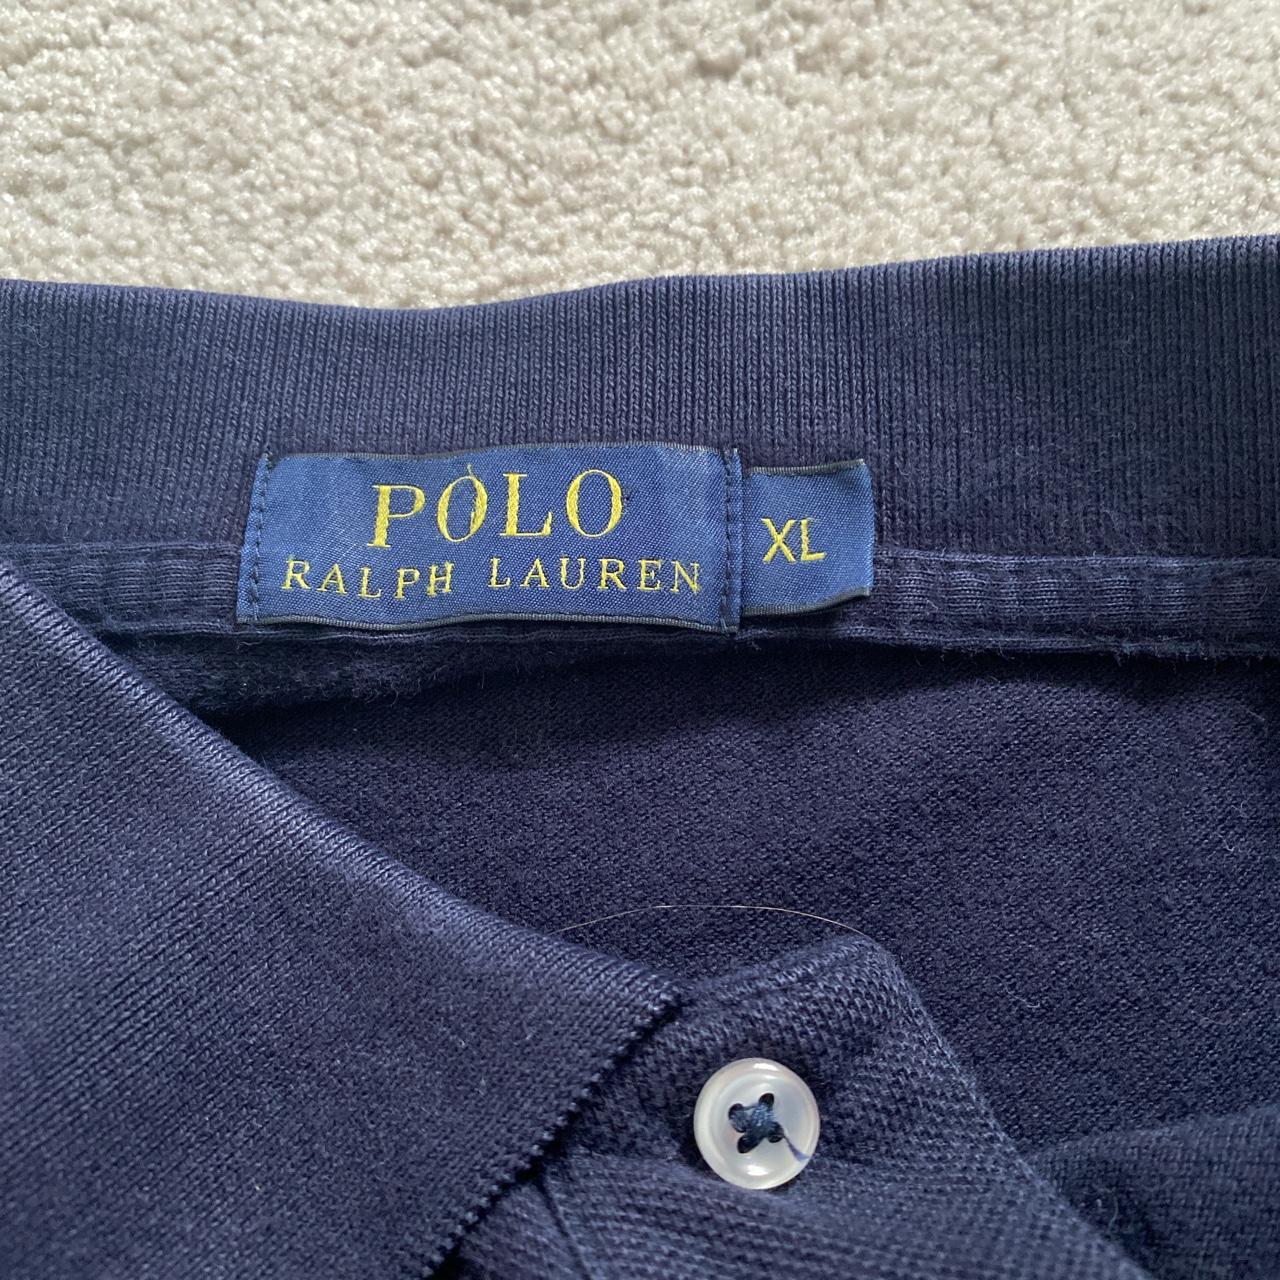 Ralph Lauren polo cropped with adjustable cord- size... - Depop